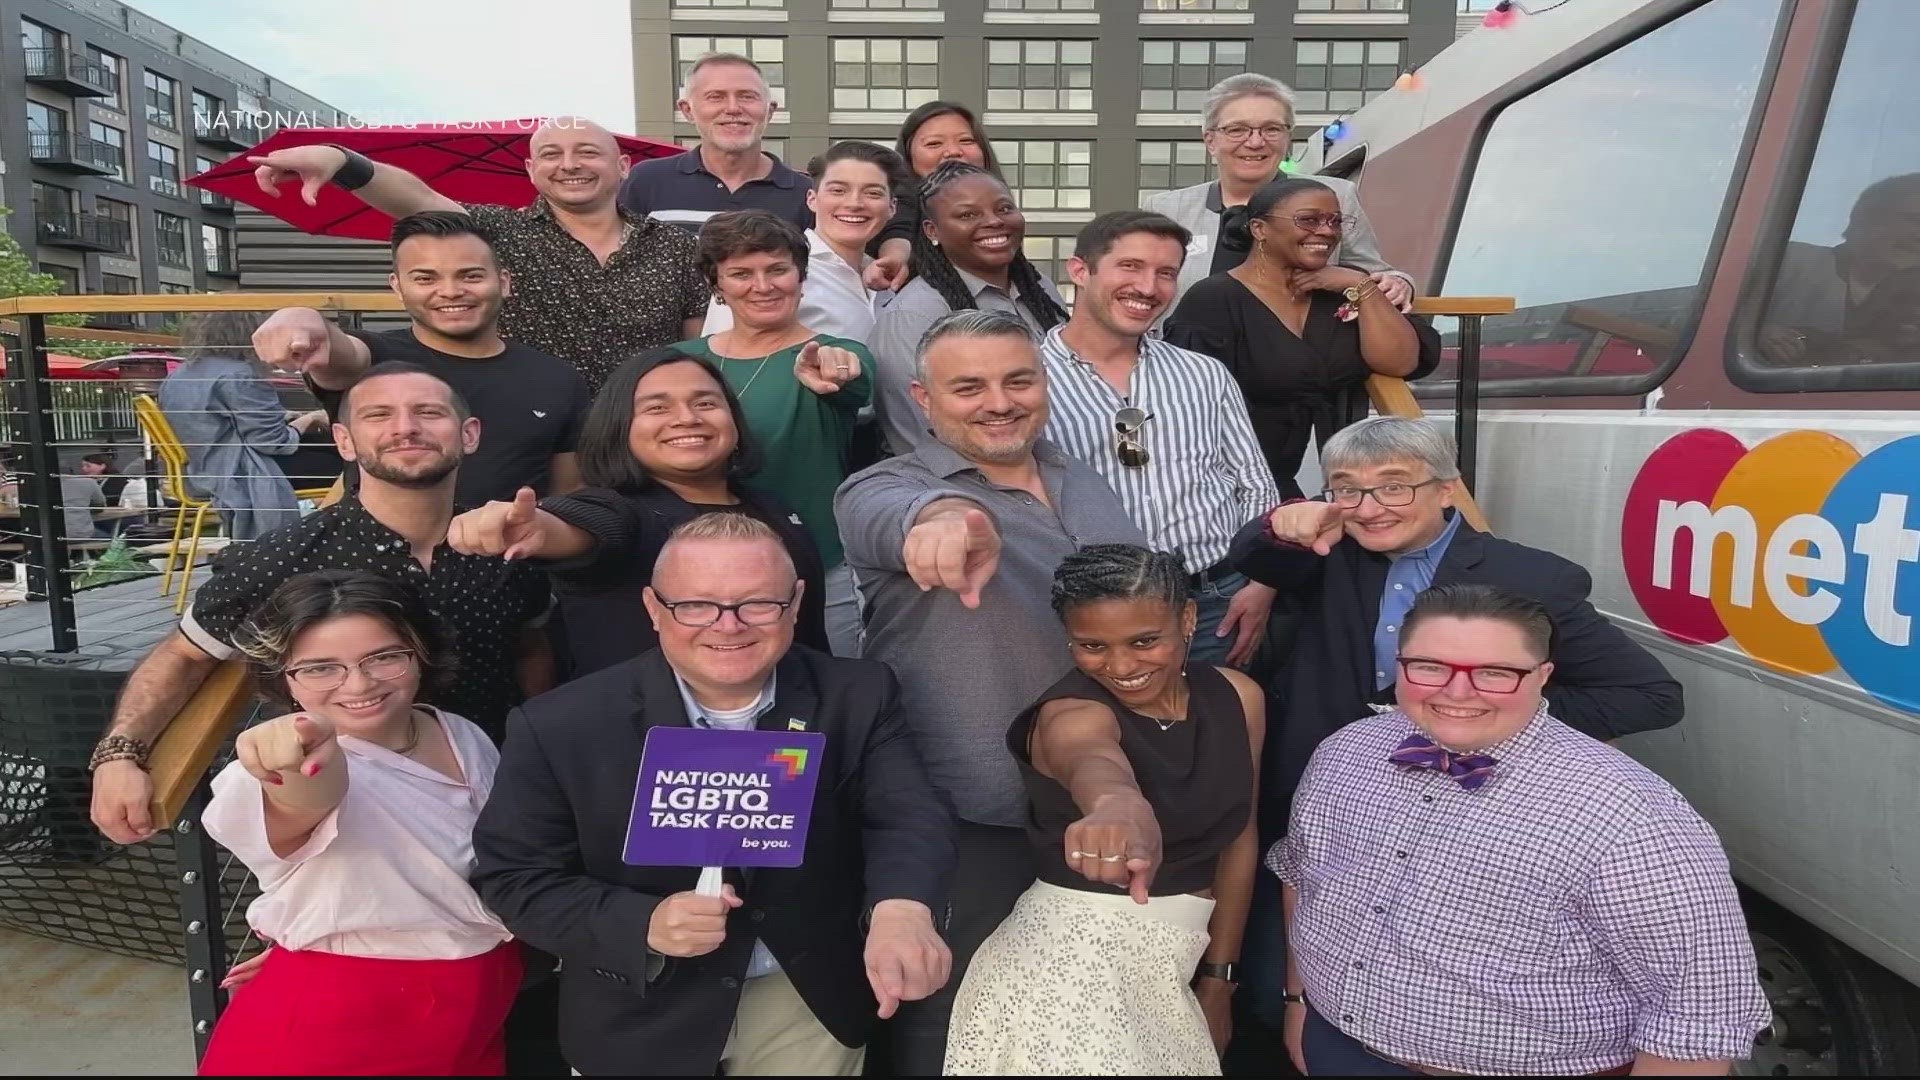 On the same year it celebrated its 50th anniversary, the Capital Pride Alliance honored the National LGBTQ Task Force at the annual Pride Honors.